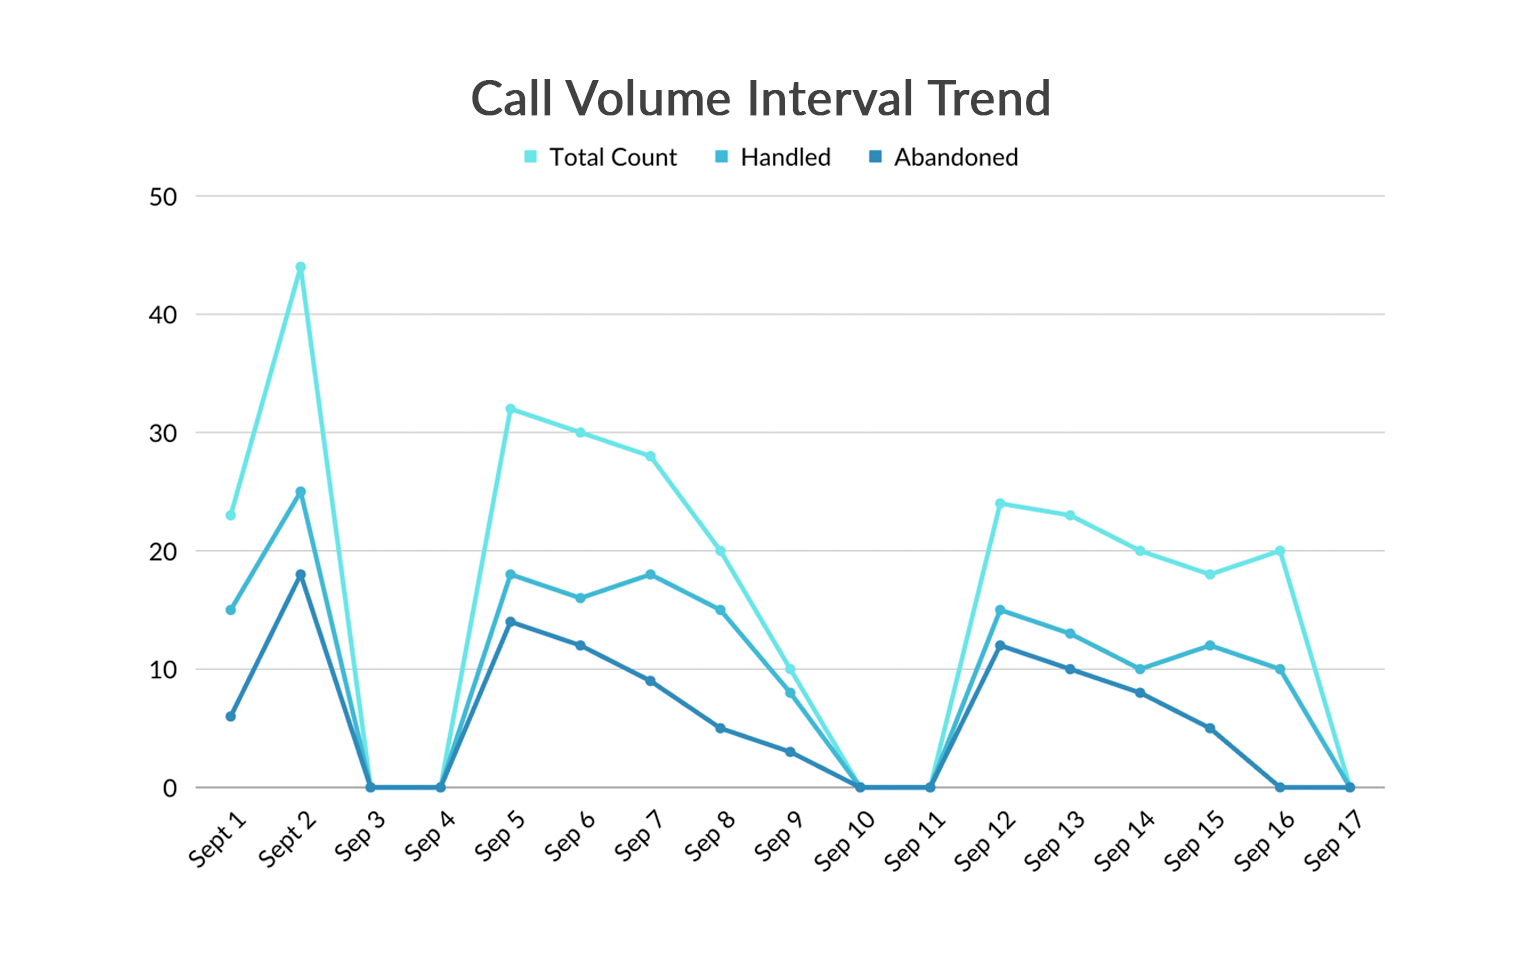 View call volume for defined intervals.